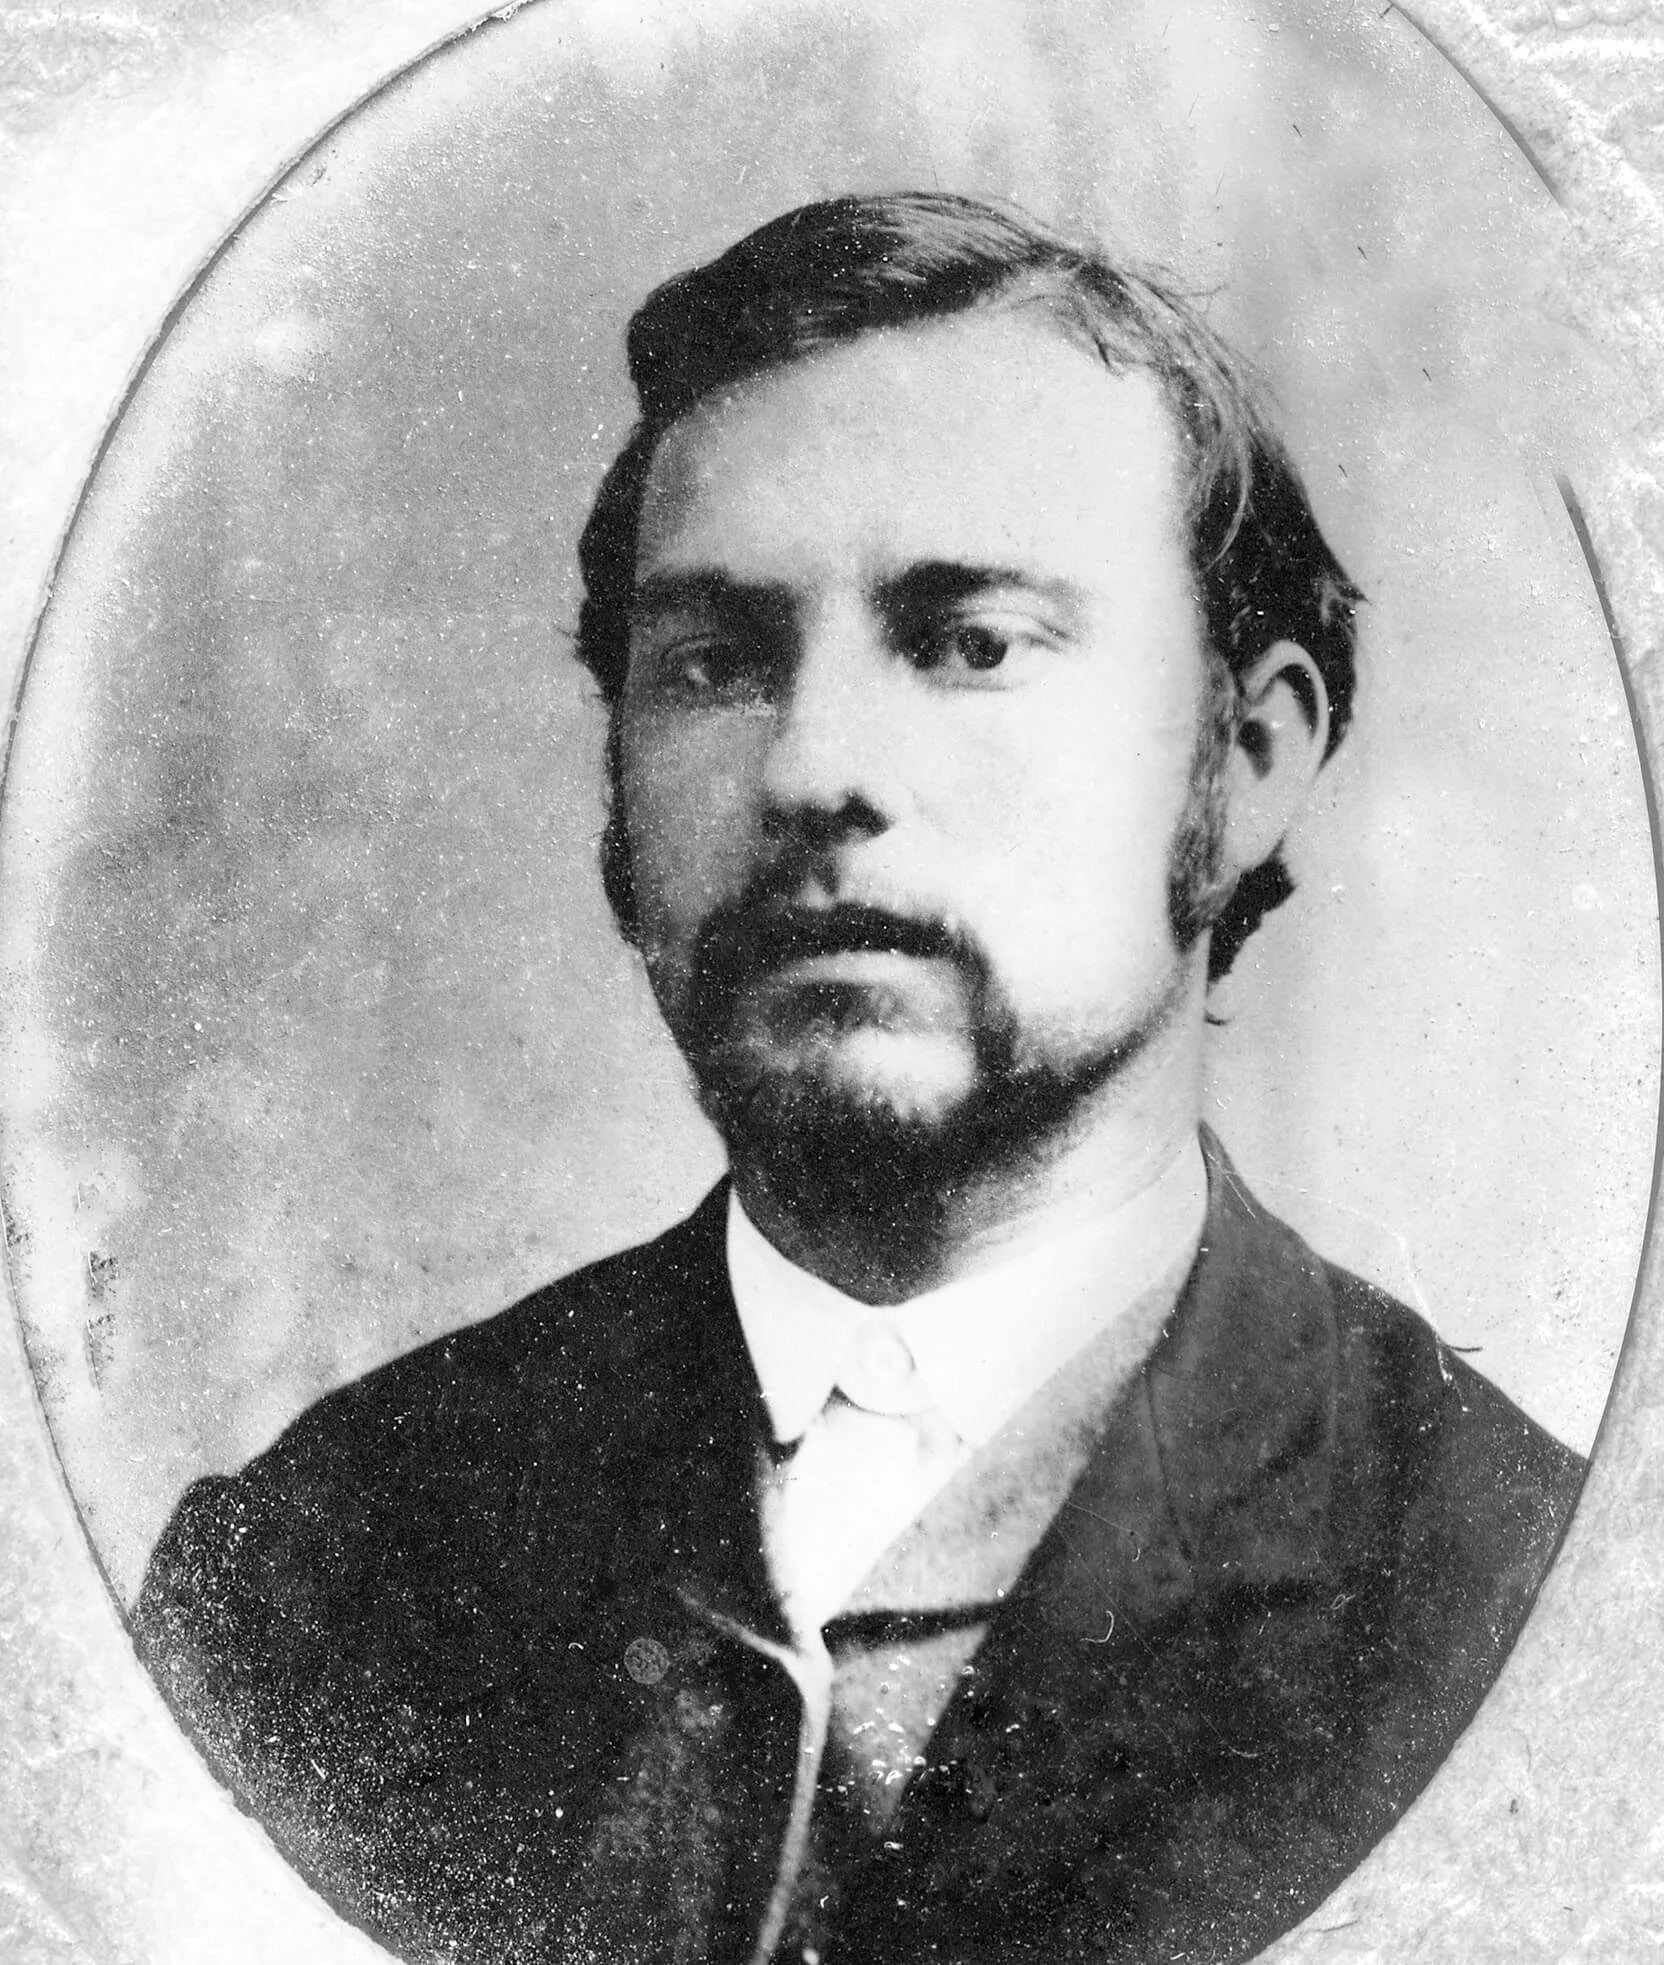 Photograph of a white man with dark hair and a goatee. He is wearing a dark suit jacket.